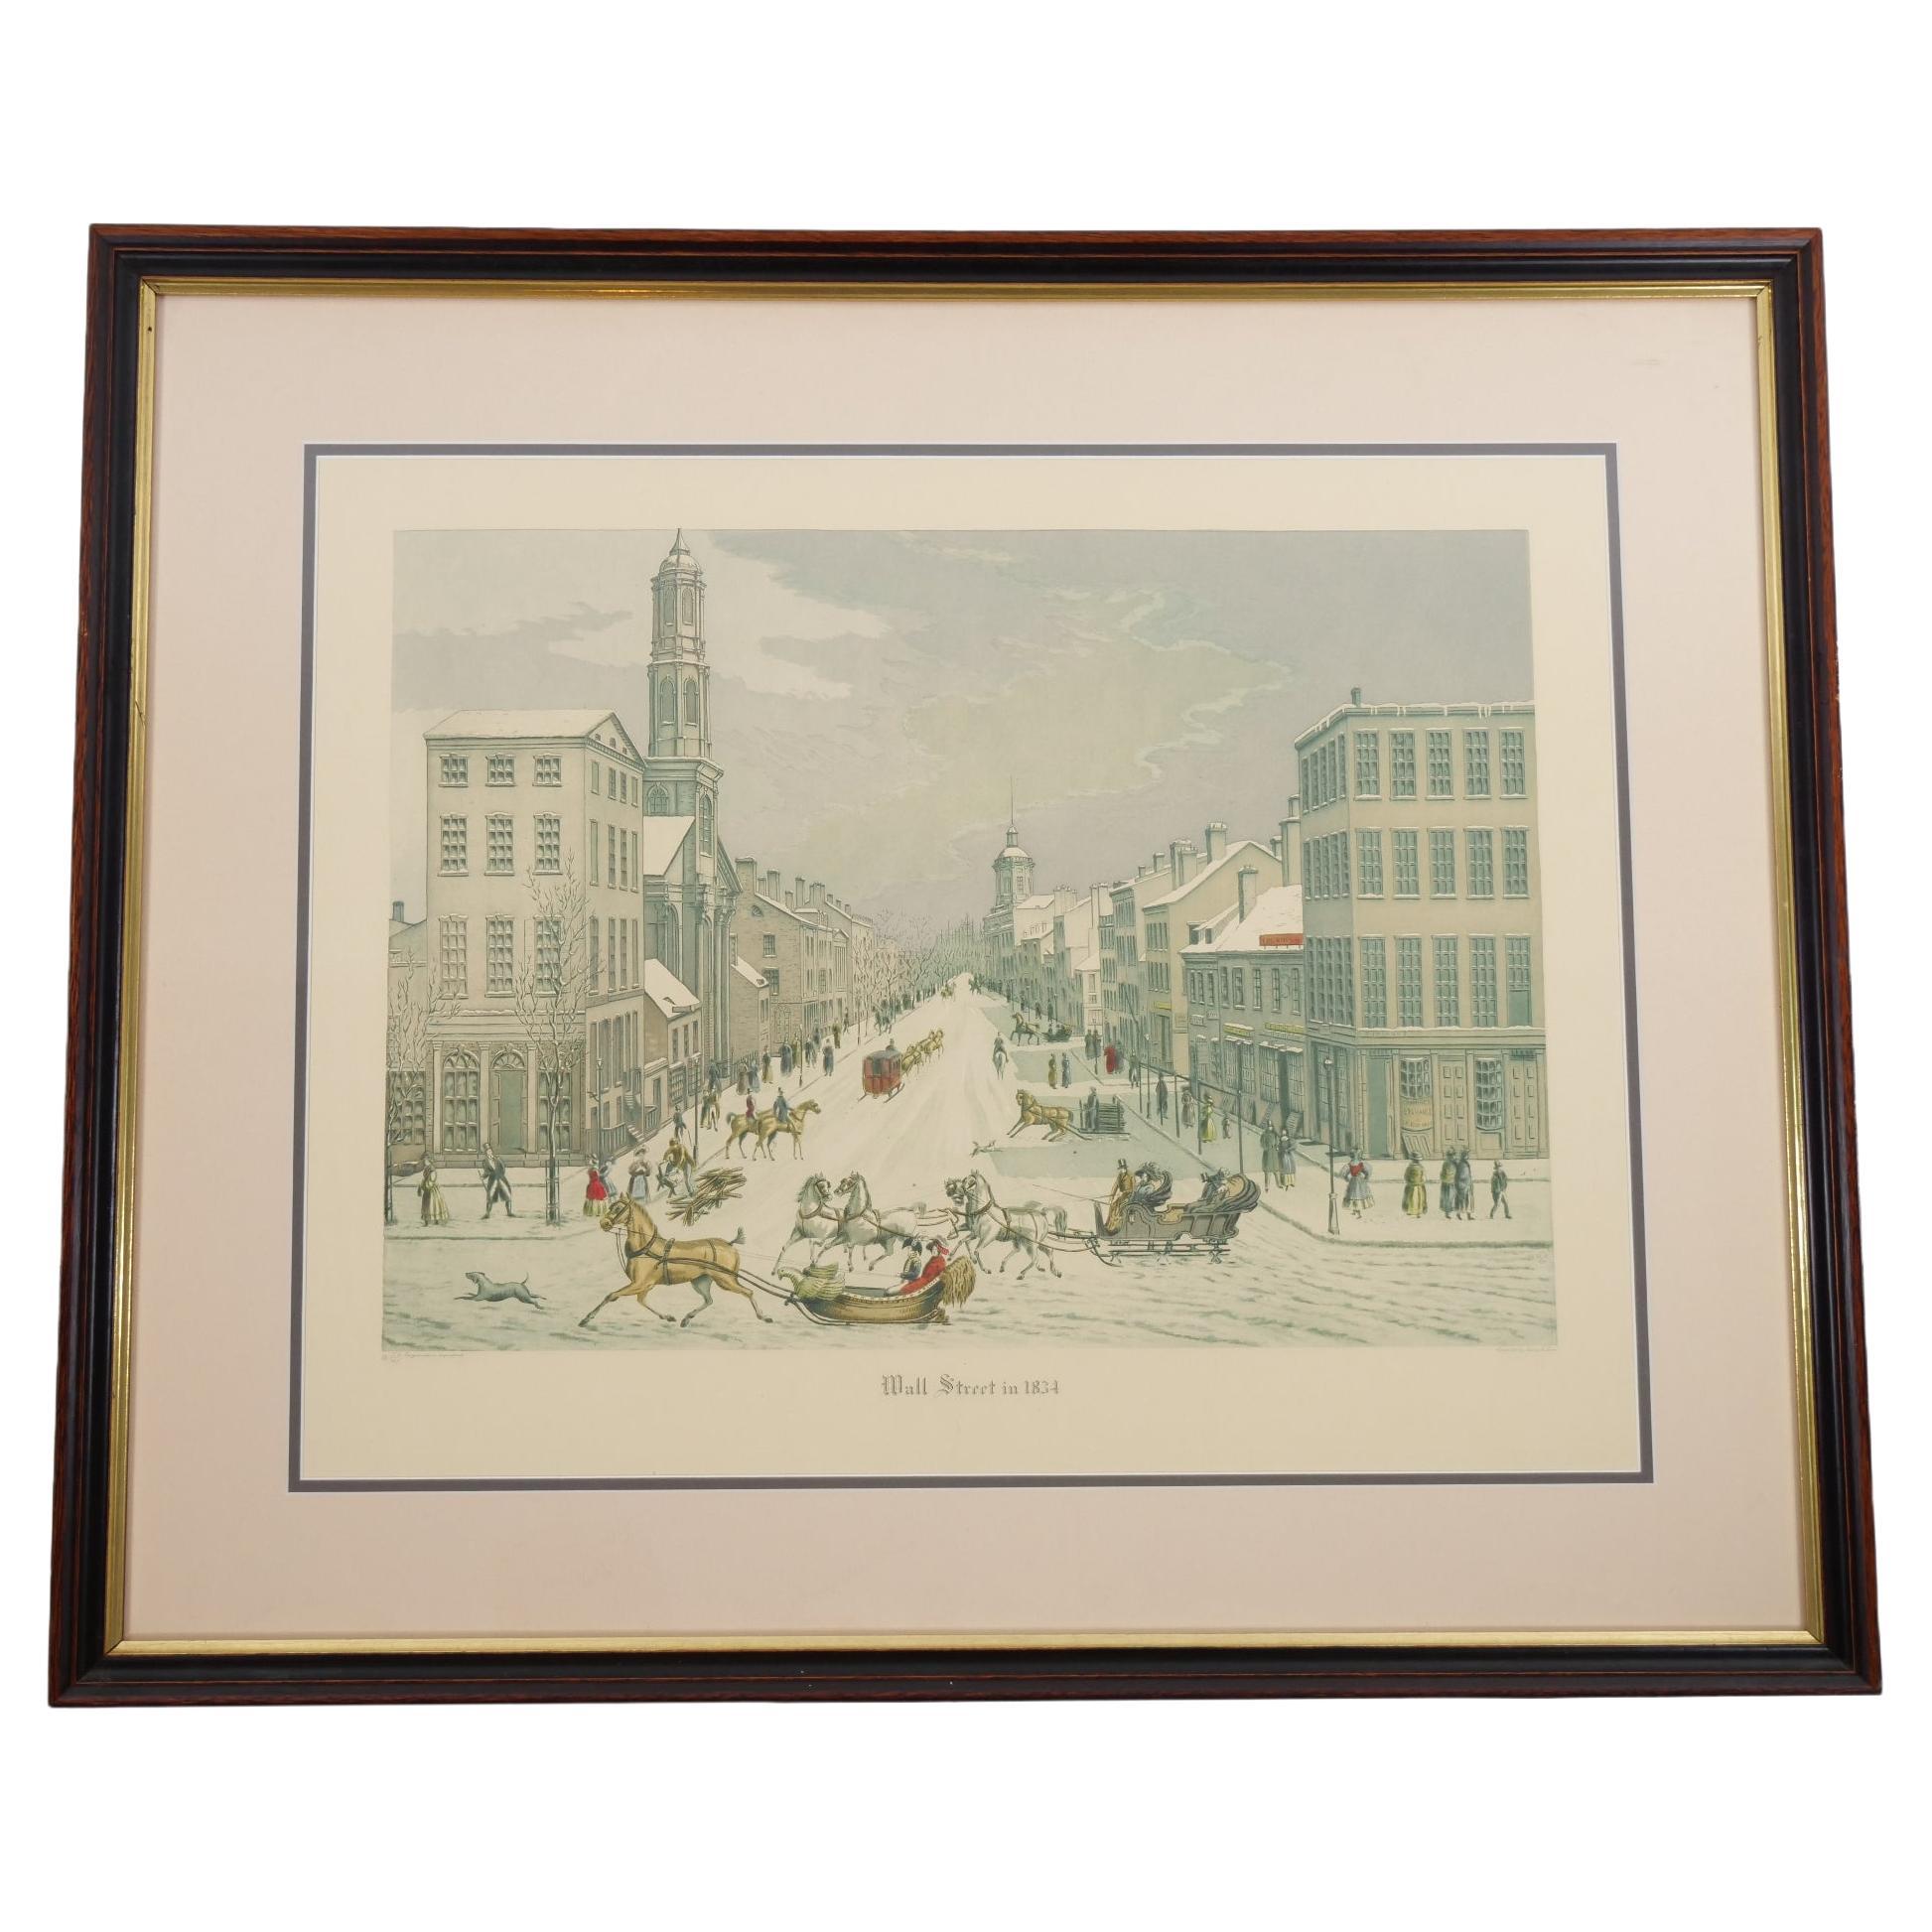 Wall Street 1834 Framed Aquatint Etching After Raoul Varin (1865-1943) For Sale